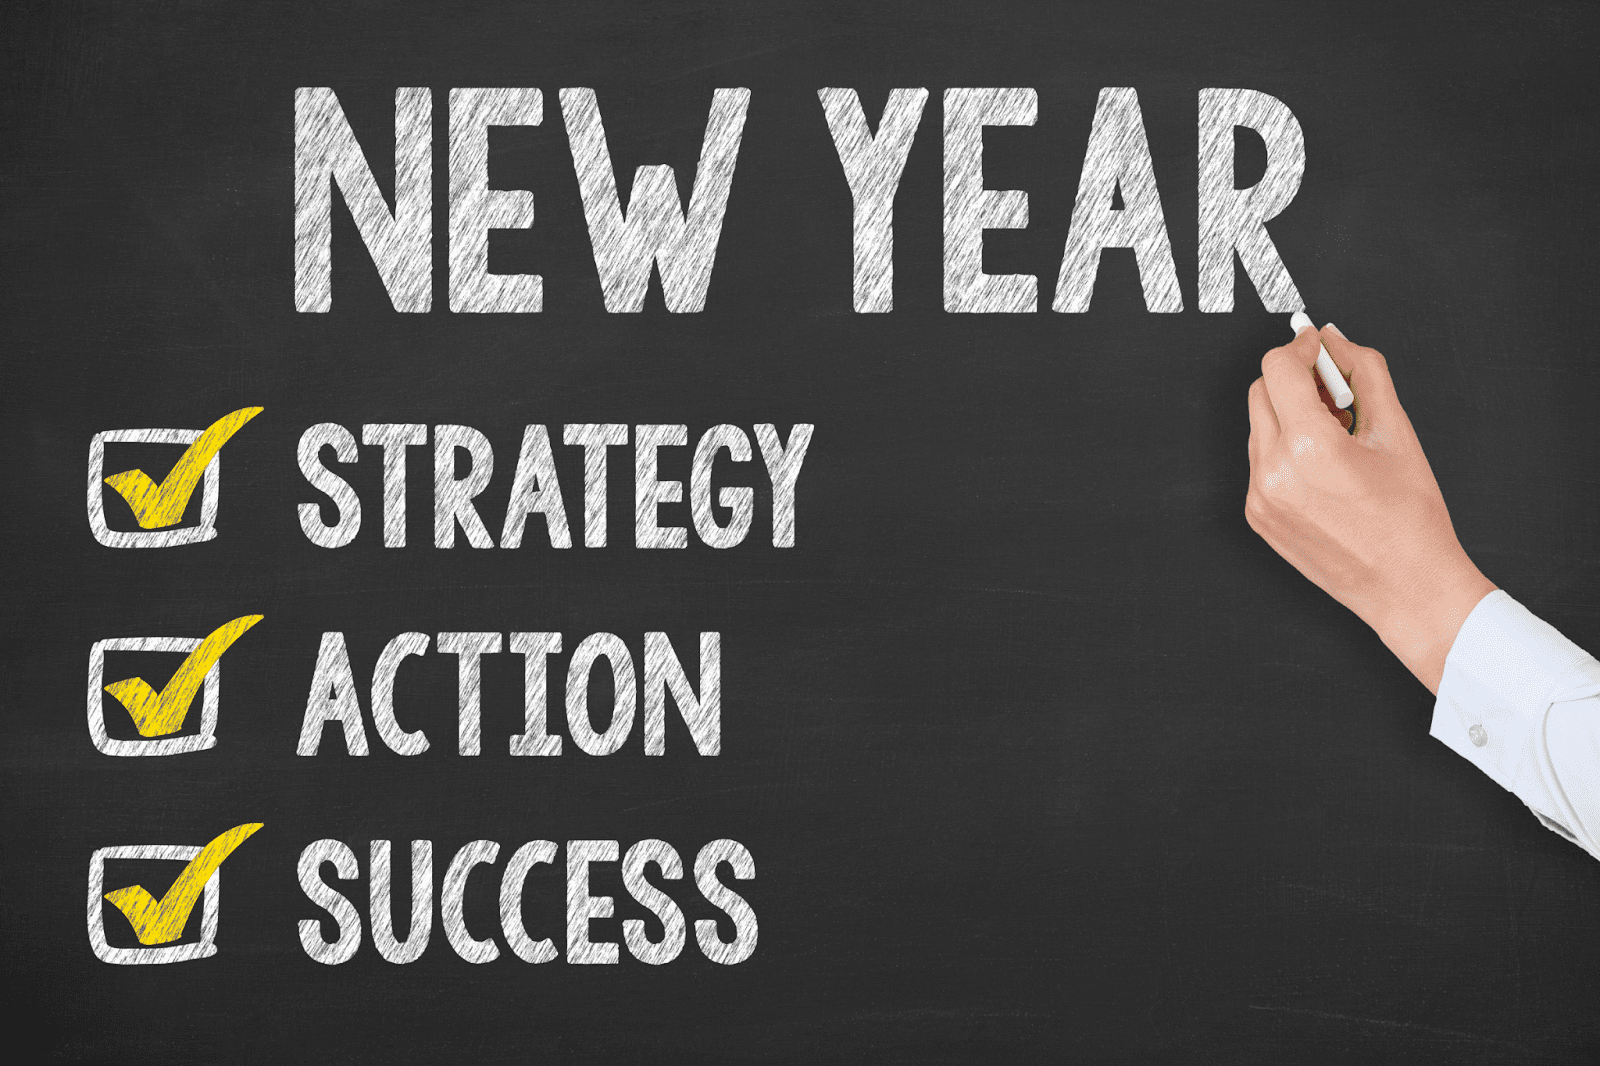 Graphic words: New Year - strategy, action, success